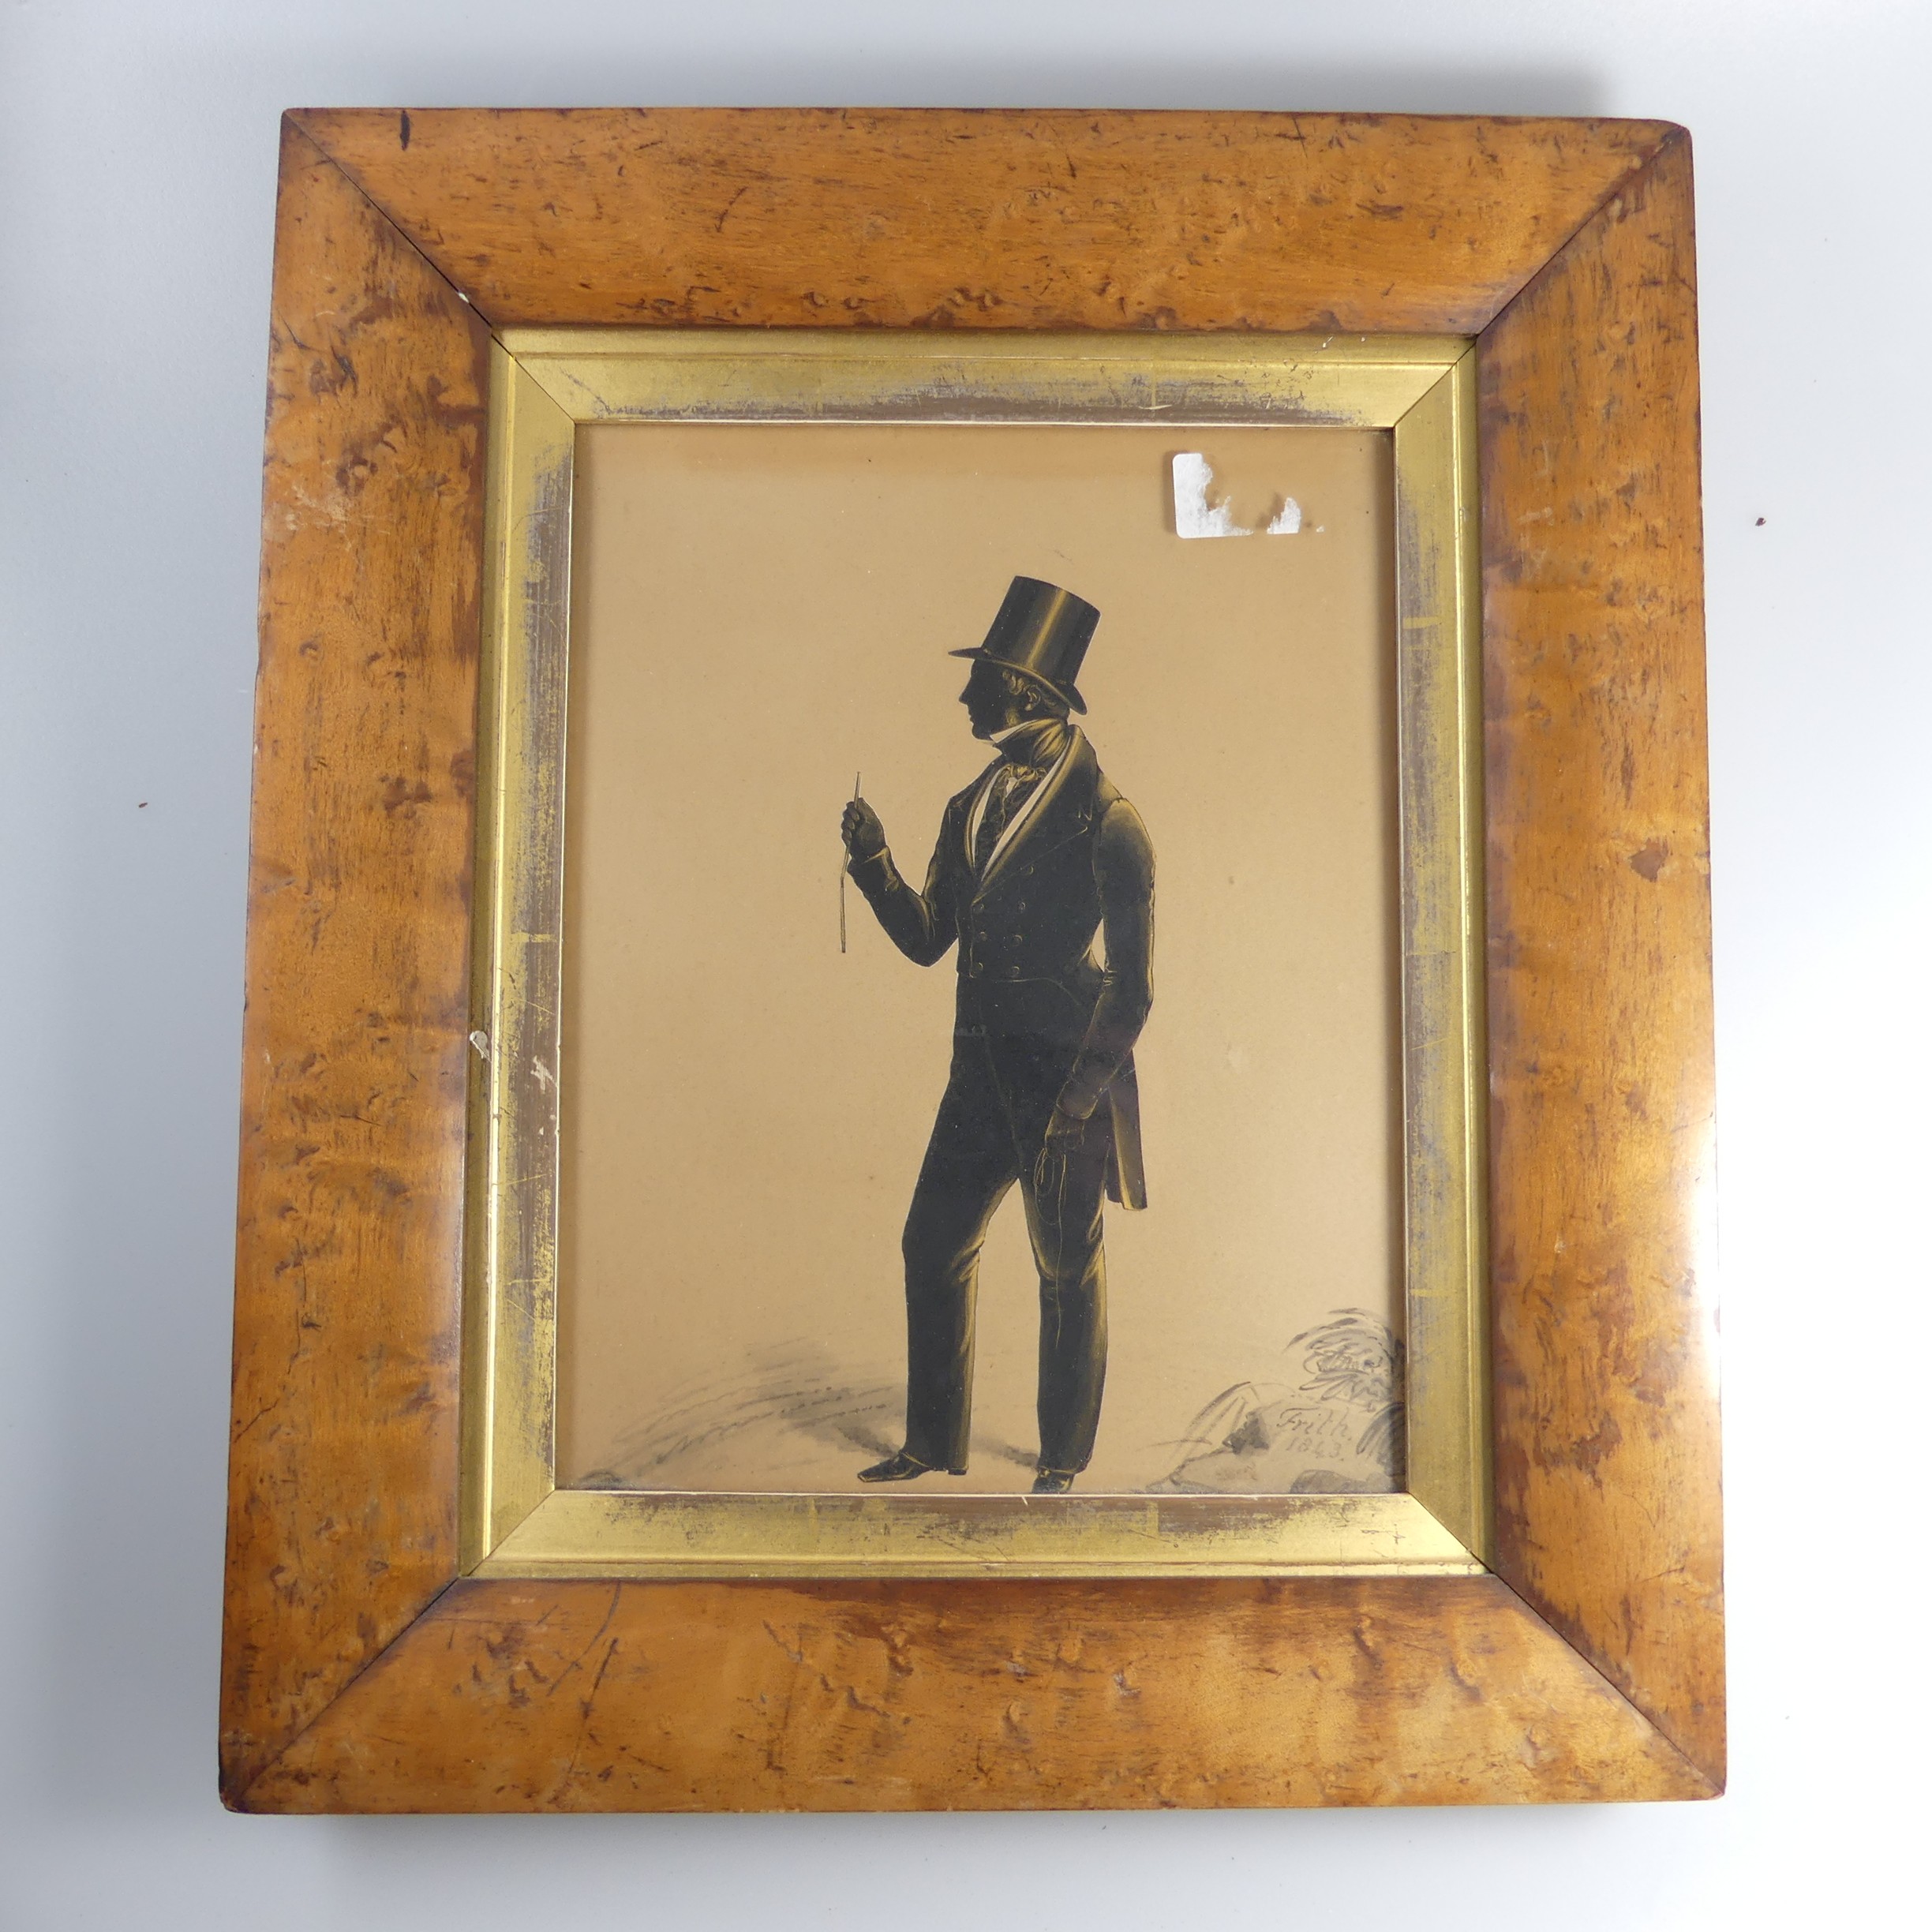 Frederick Frith (1819-1871), Silhouette portrait of a Gentleman in Top Hat, cut-out silhouette